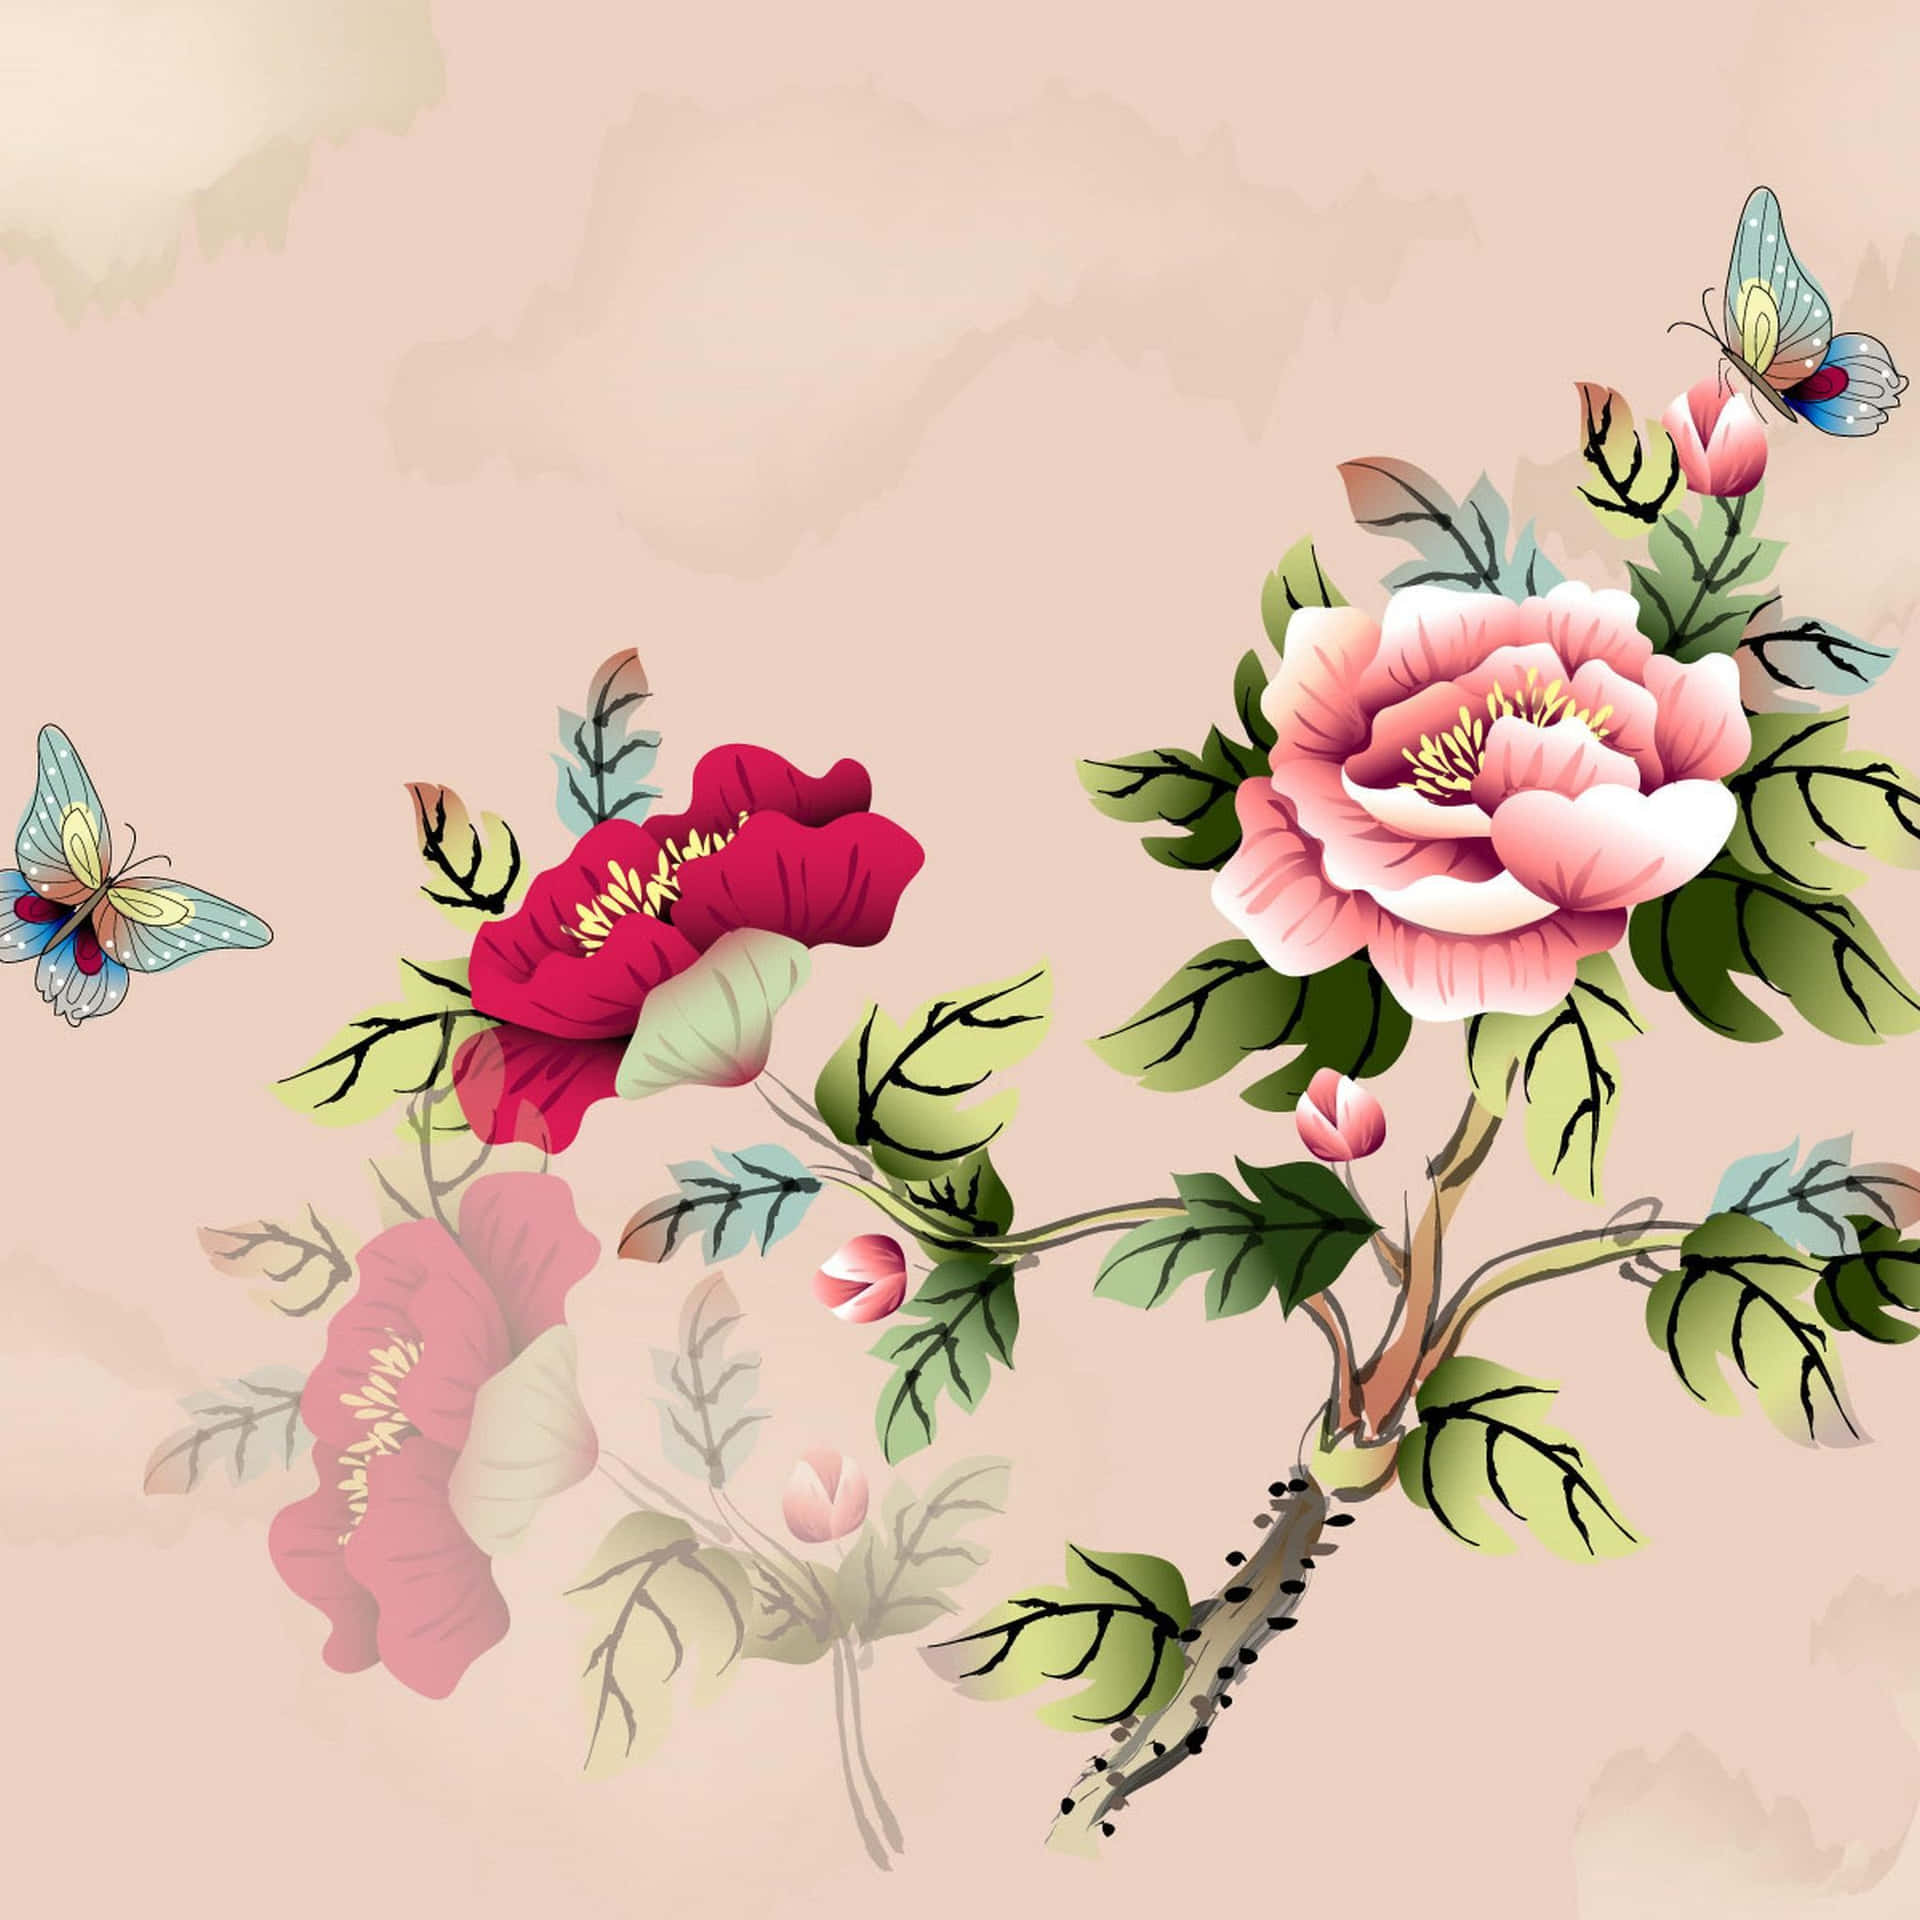 A Painting Of Flowers And Butterflies Wallpaper